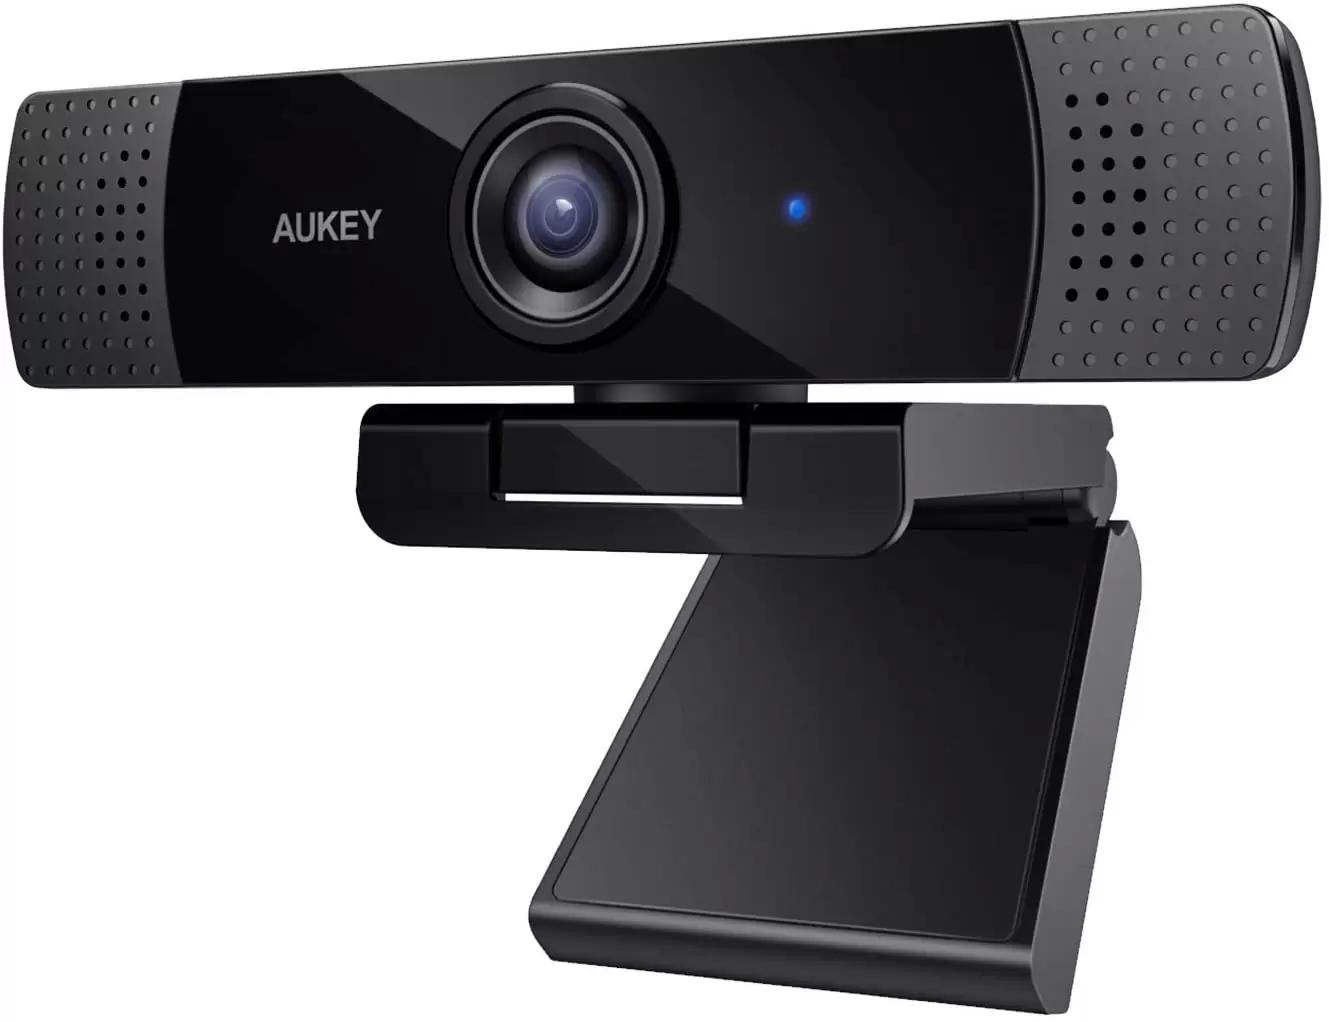 Aukey 1080p 30 FPS 2MP USB Webcam for $29.74 Shipped